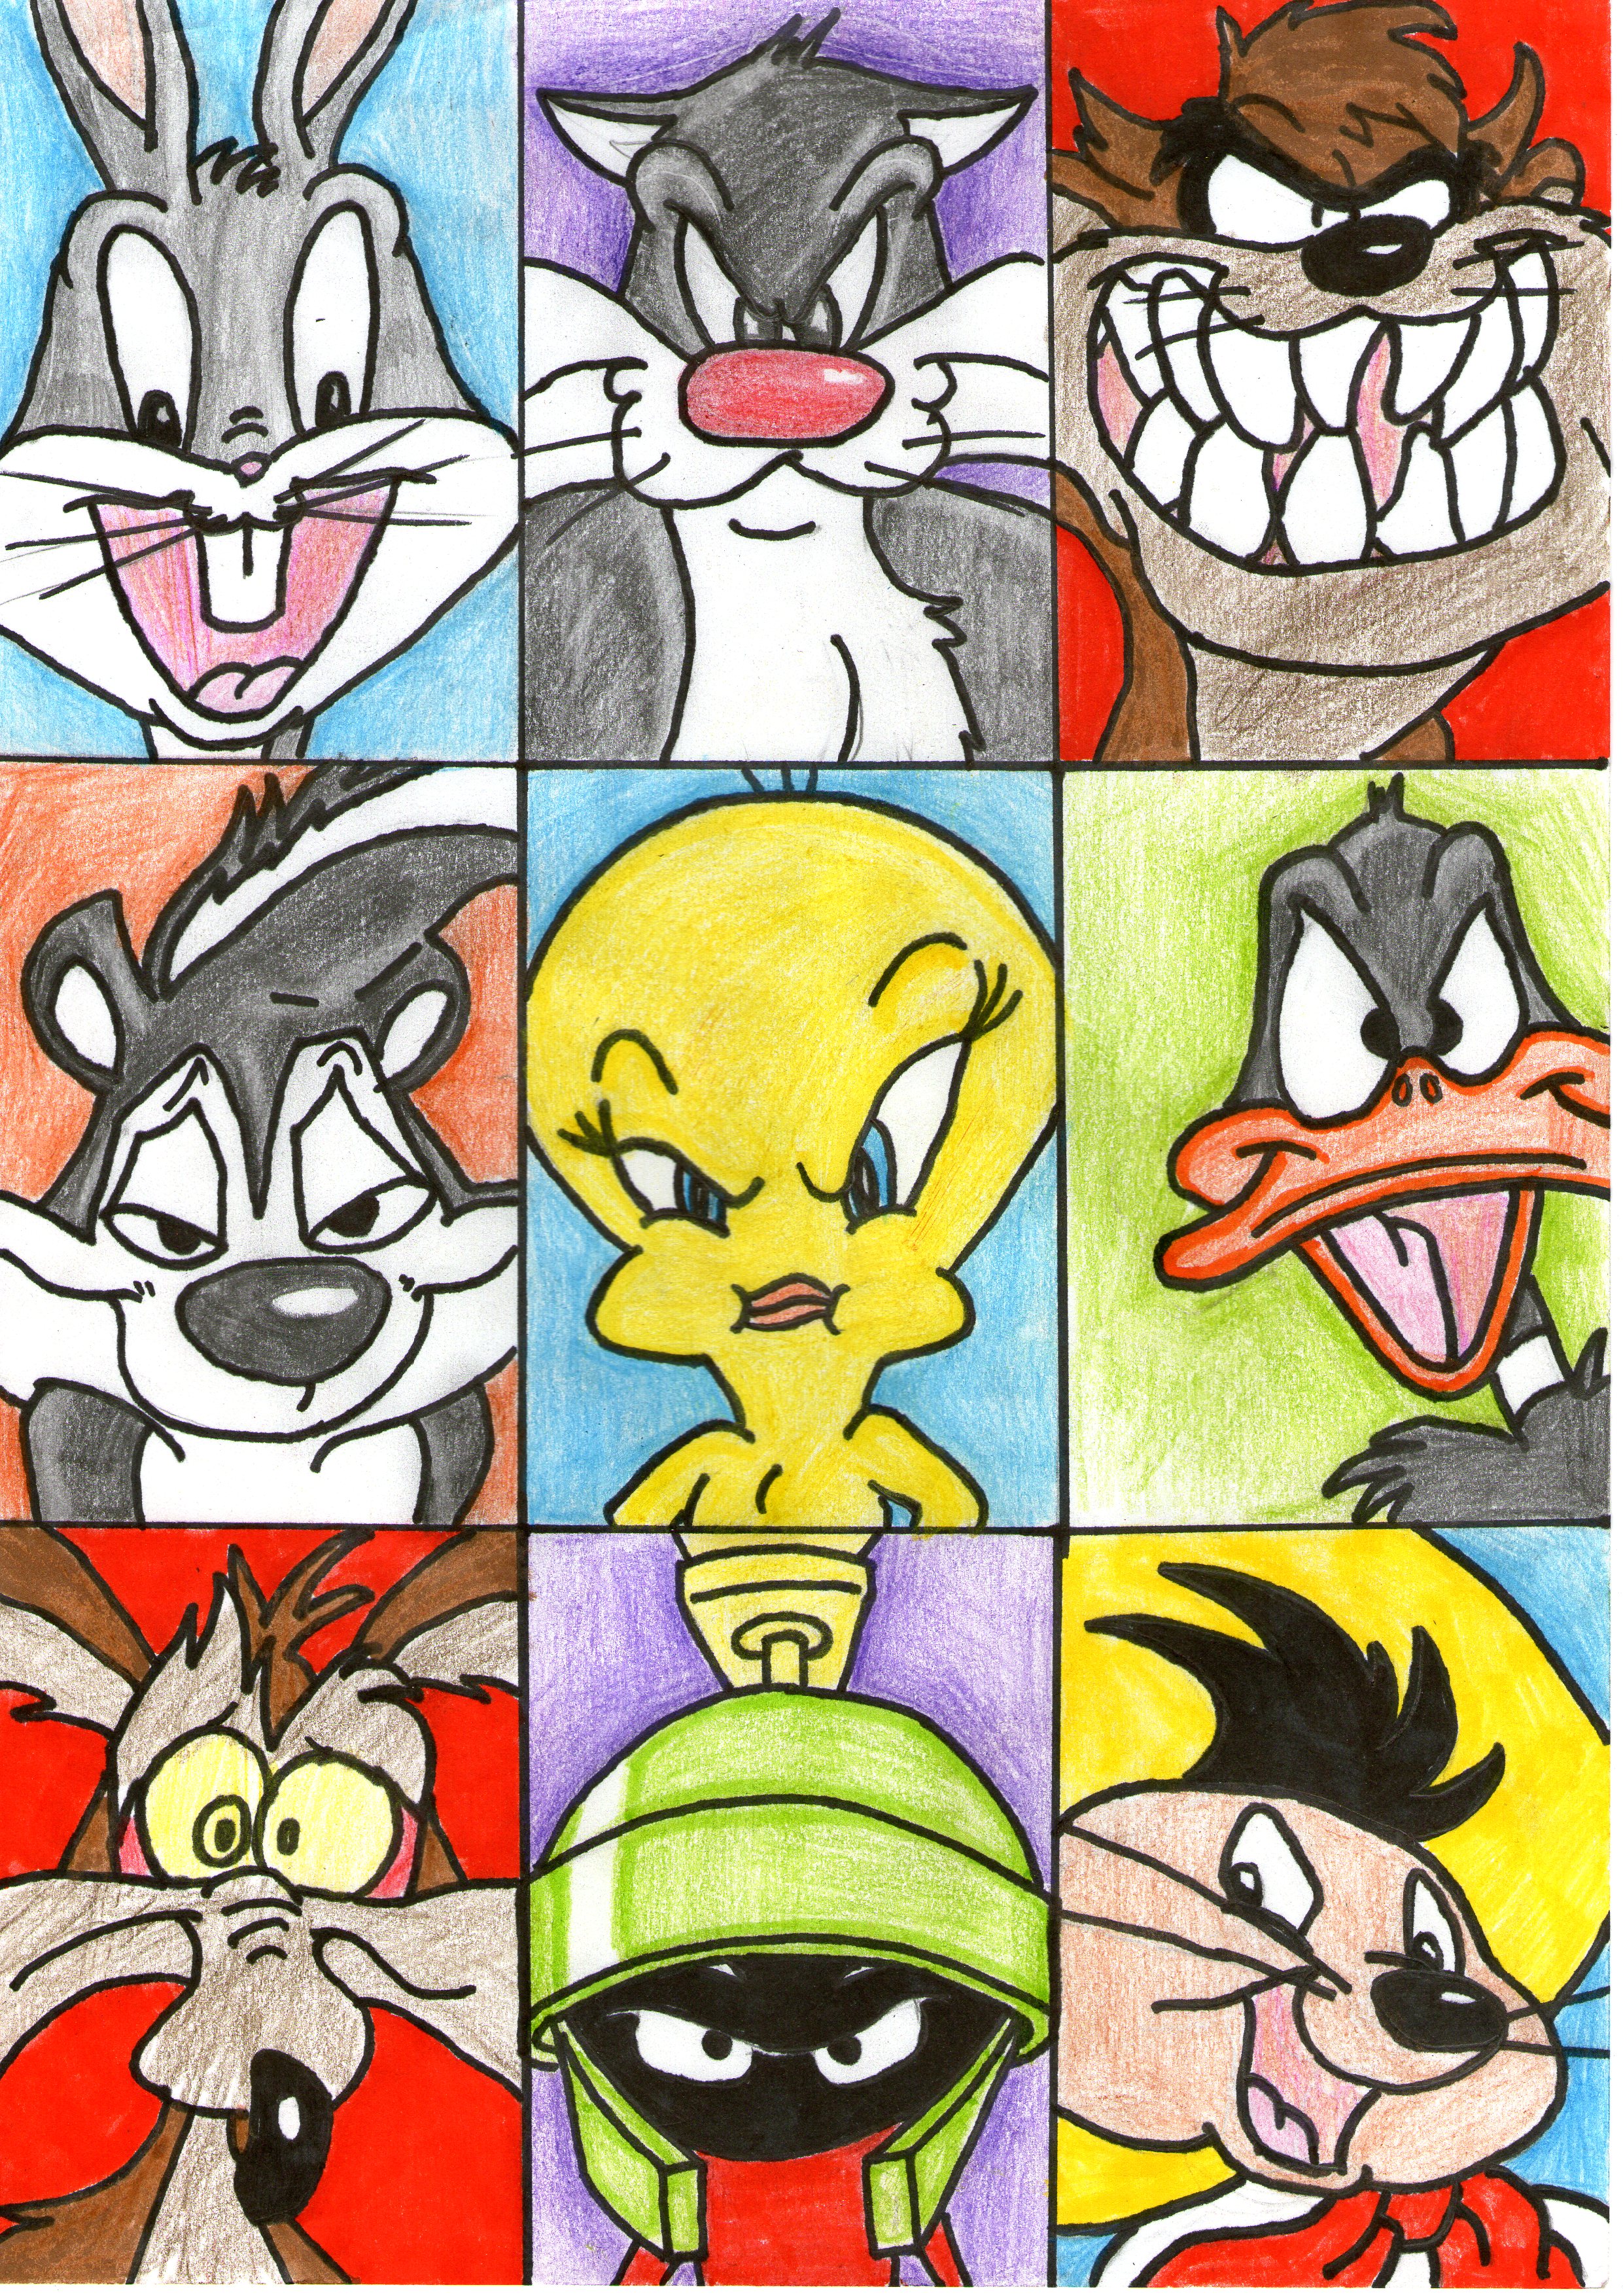 Looney Tunes Drawing Wallpaper Image For iPhone Cartoons